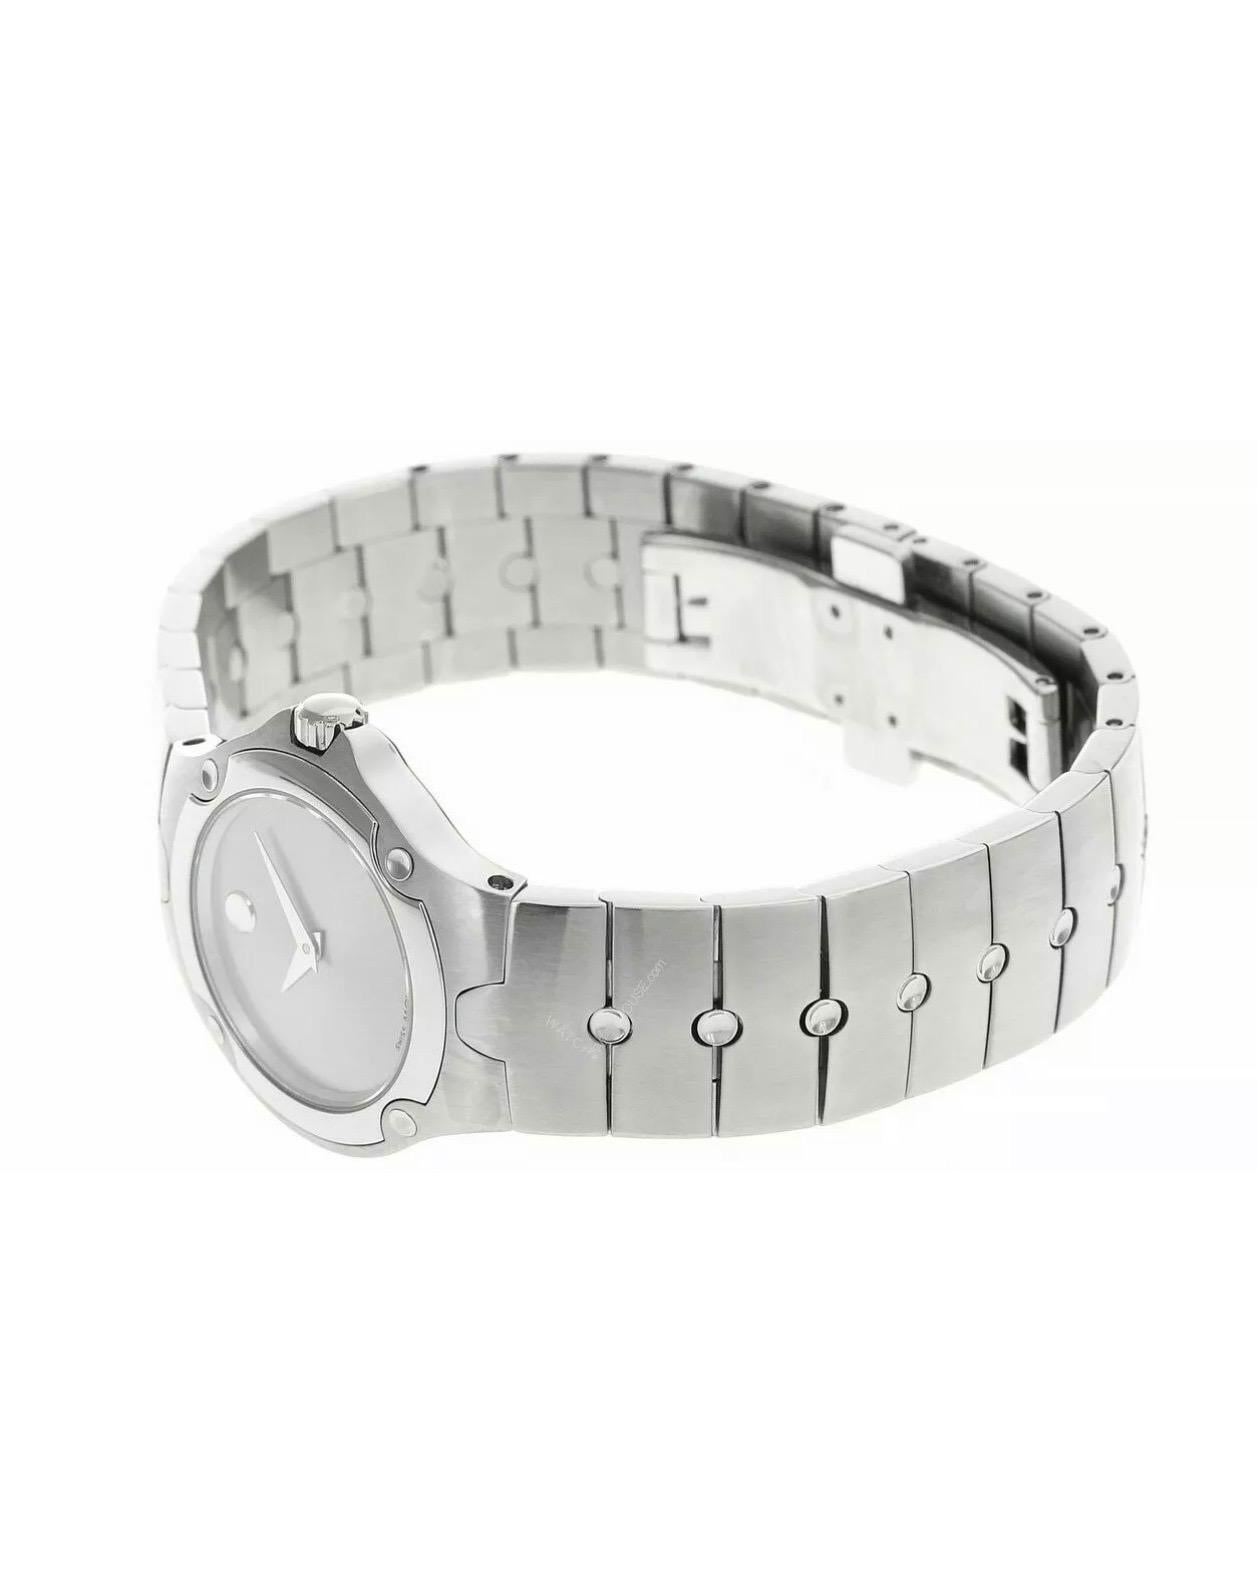 Pre owned
Movado Sports Edition Watch
Model: 84.A1 . 1831
5393445
Case: 26mm
Band: , 6.5